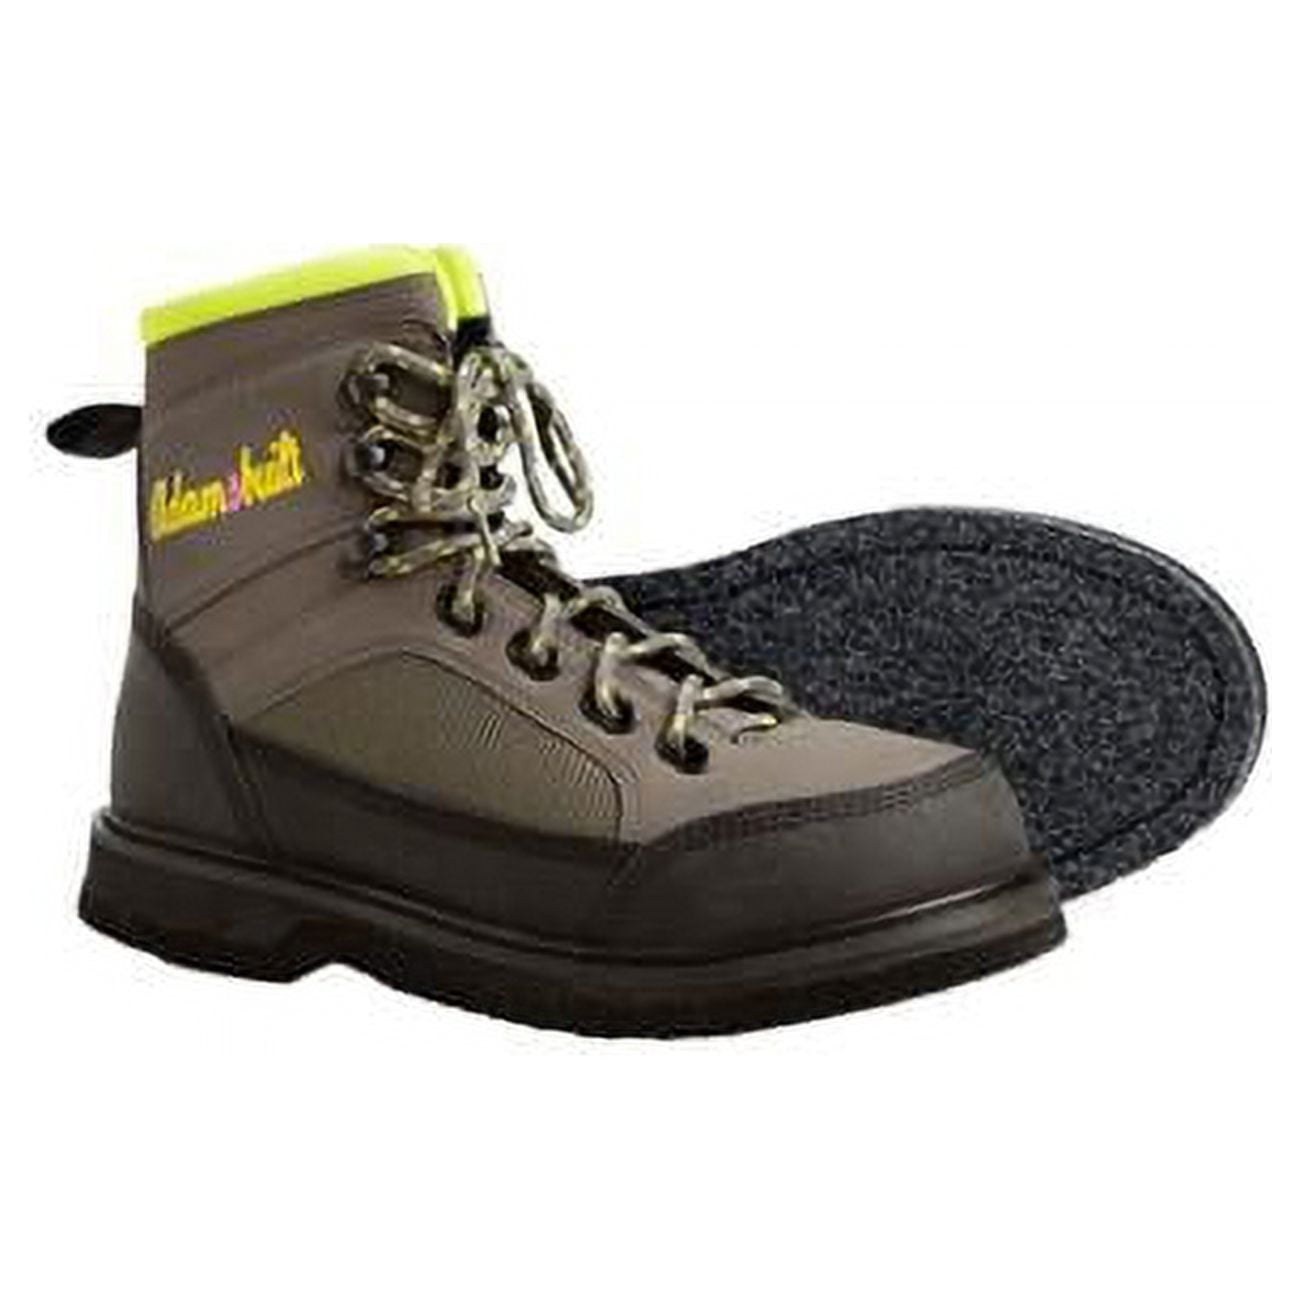 Picture of Adamsbuilt Fishing ABWSRWB-10 Womens Smith River Felt Sole Wading Boot - Size 10